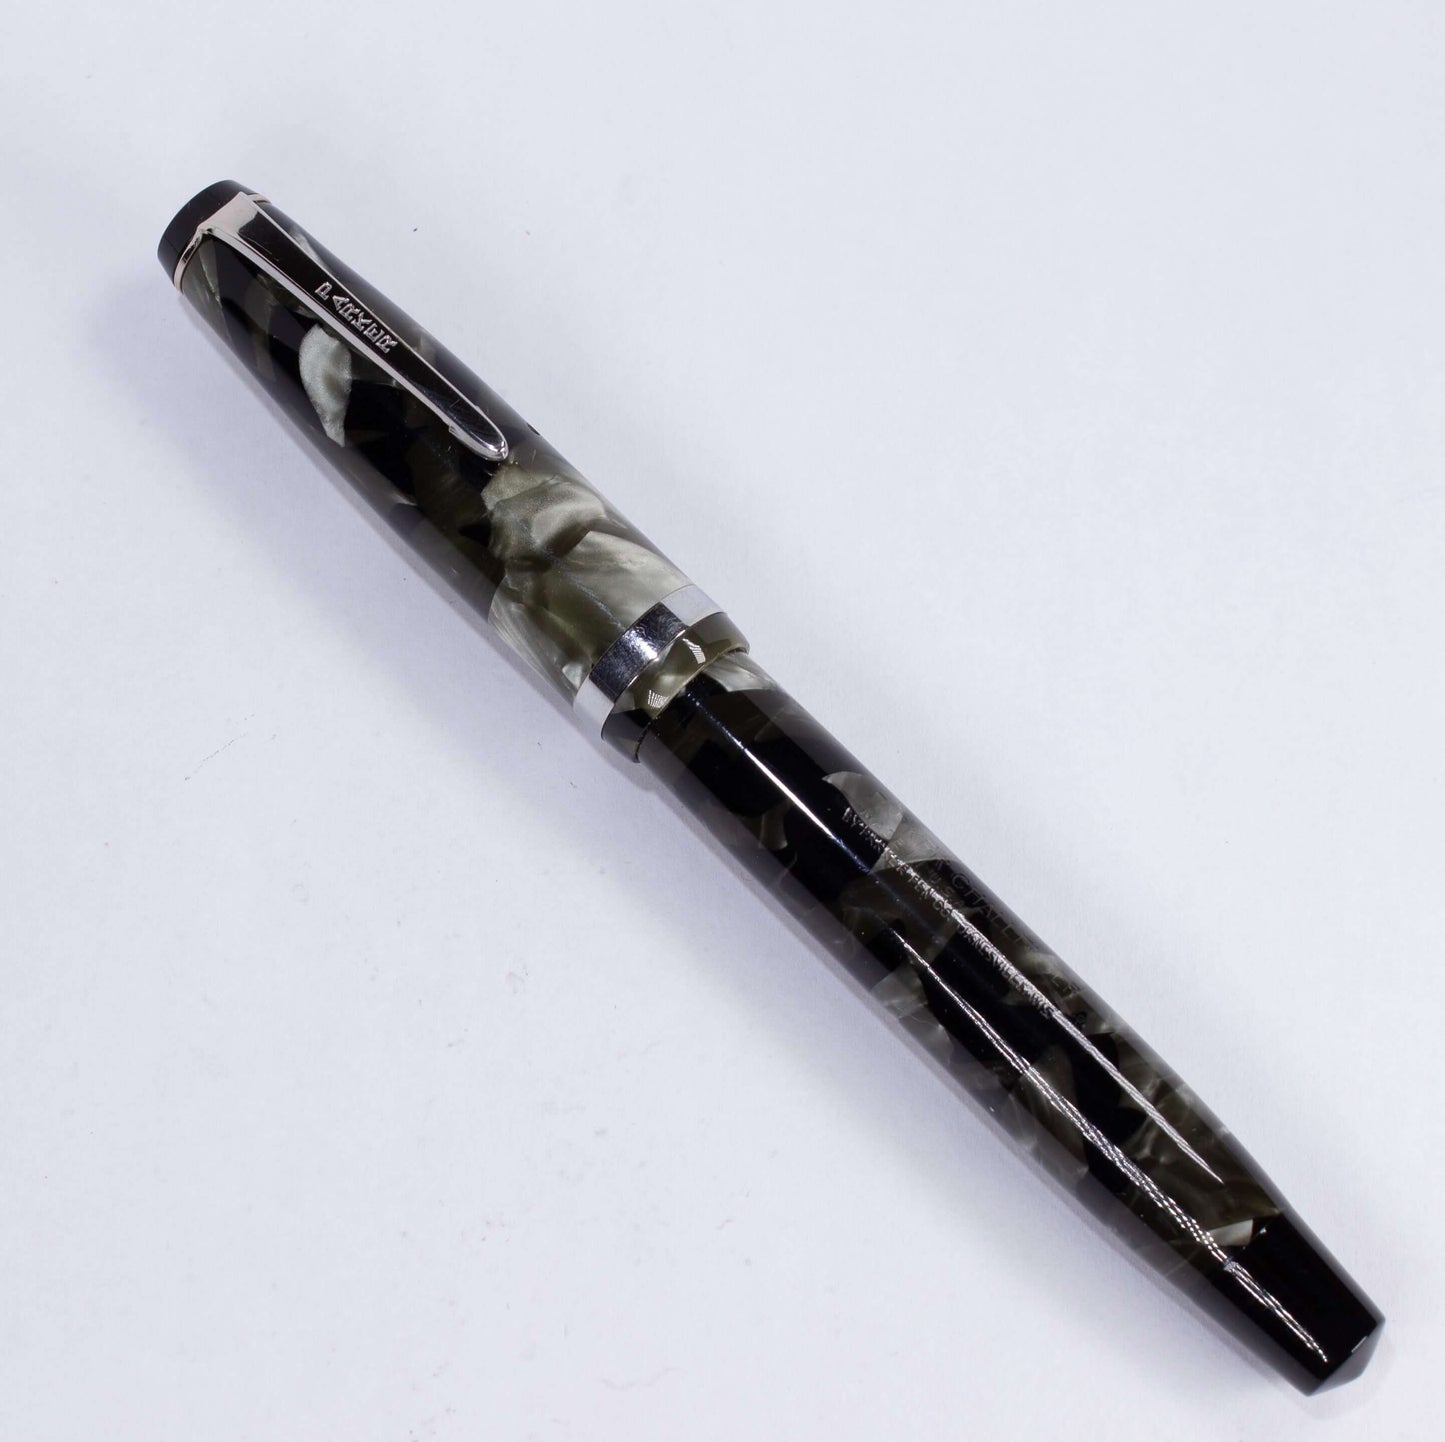 Parker Challenger Fountain Pen, Grey Marbled, Nickel Plated Clip and Cap Band, Button Filler, 14K Gold Nib Name/Type: Parker Challenger Restored Vintage Fountain Pen Manufacture Year: 1930s Length: 5 Filling System: Button Filler Color/Pattern: Grey Marbl